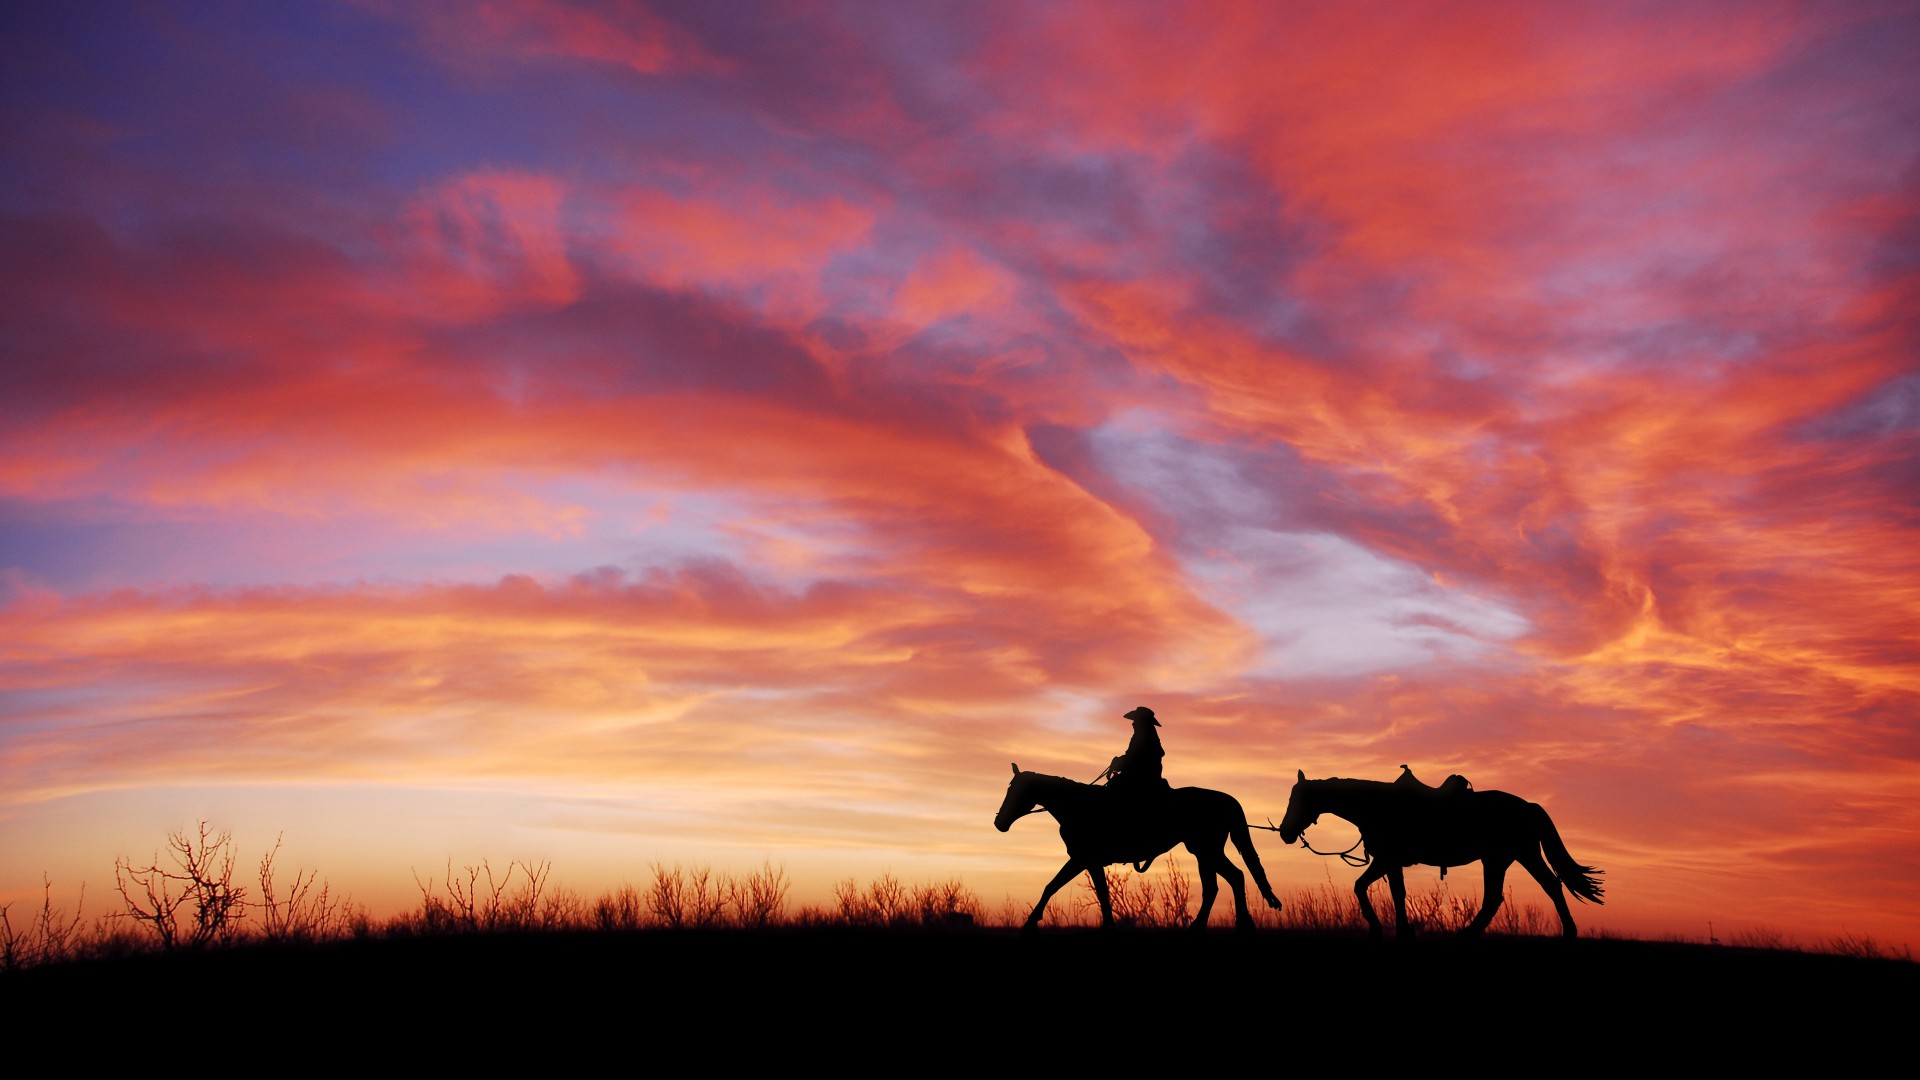 Sunset Horses Wallpaper - National Day Of The Cowboy 2019 - HD Wallpaper 